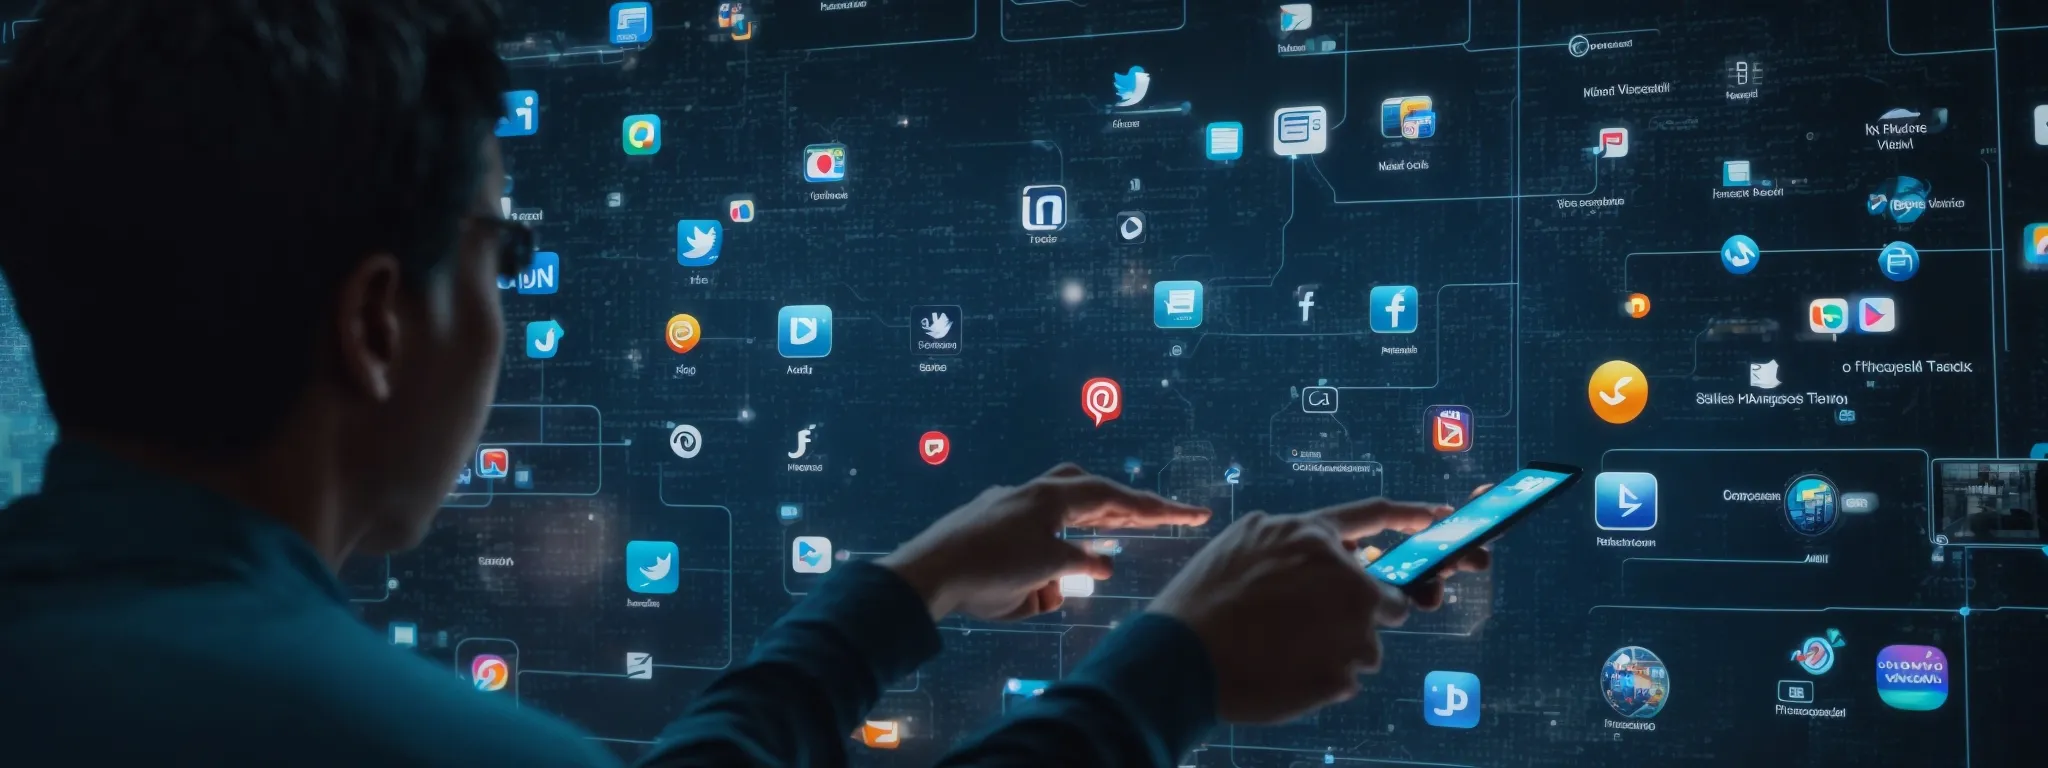 a person surrounded by social media icons tapping on a futuristic touchscreen interface to analyze and manage a brand's online presence.